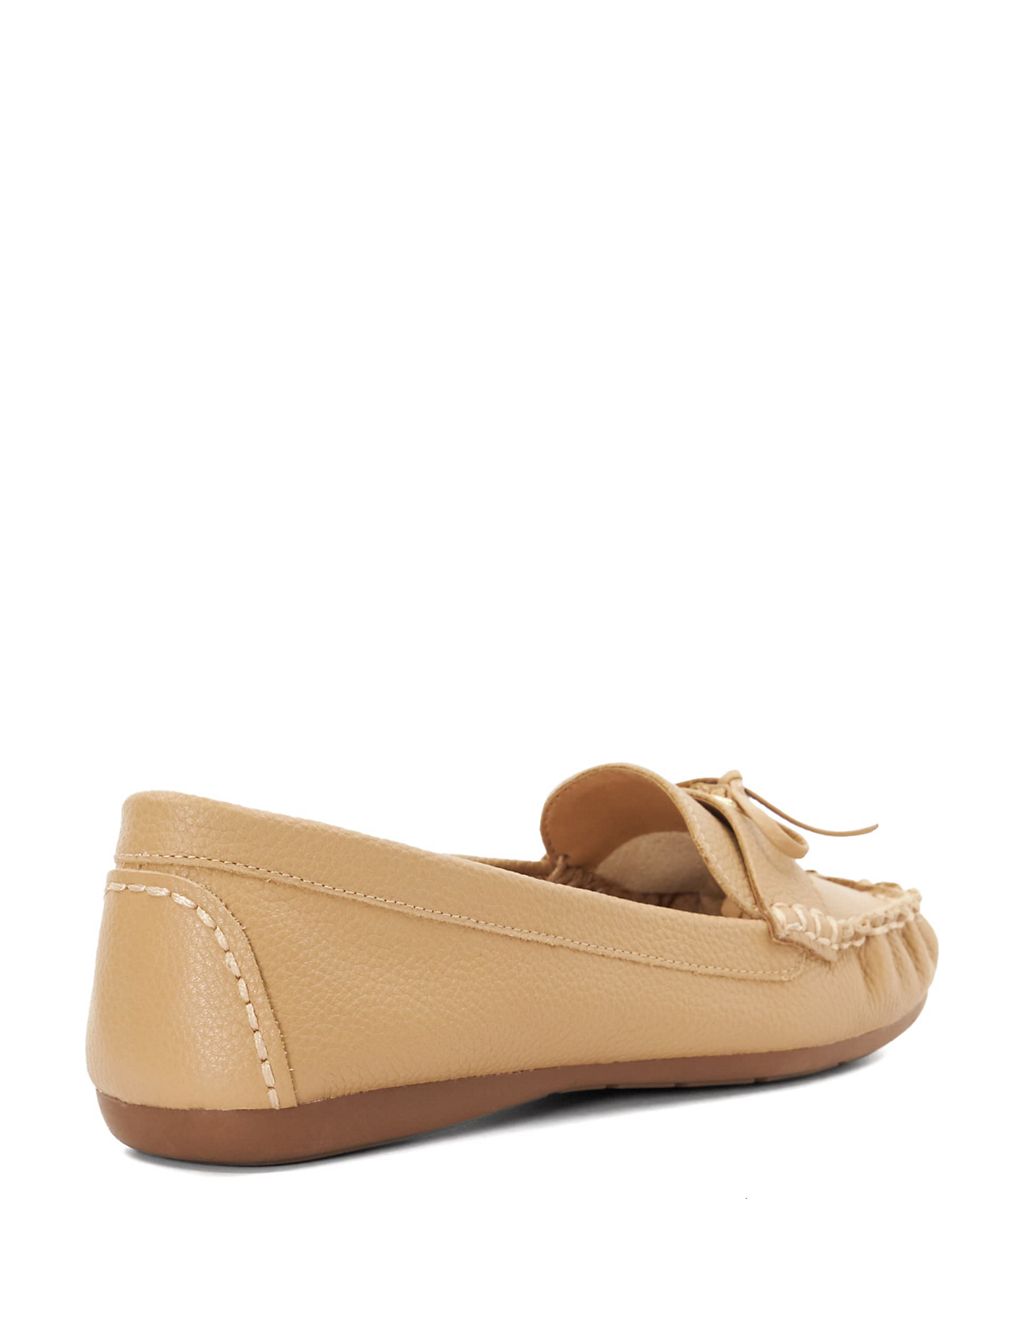 Leather Bow Flat Slip On Pumps 2 of 5